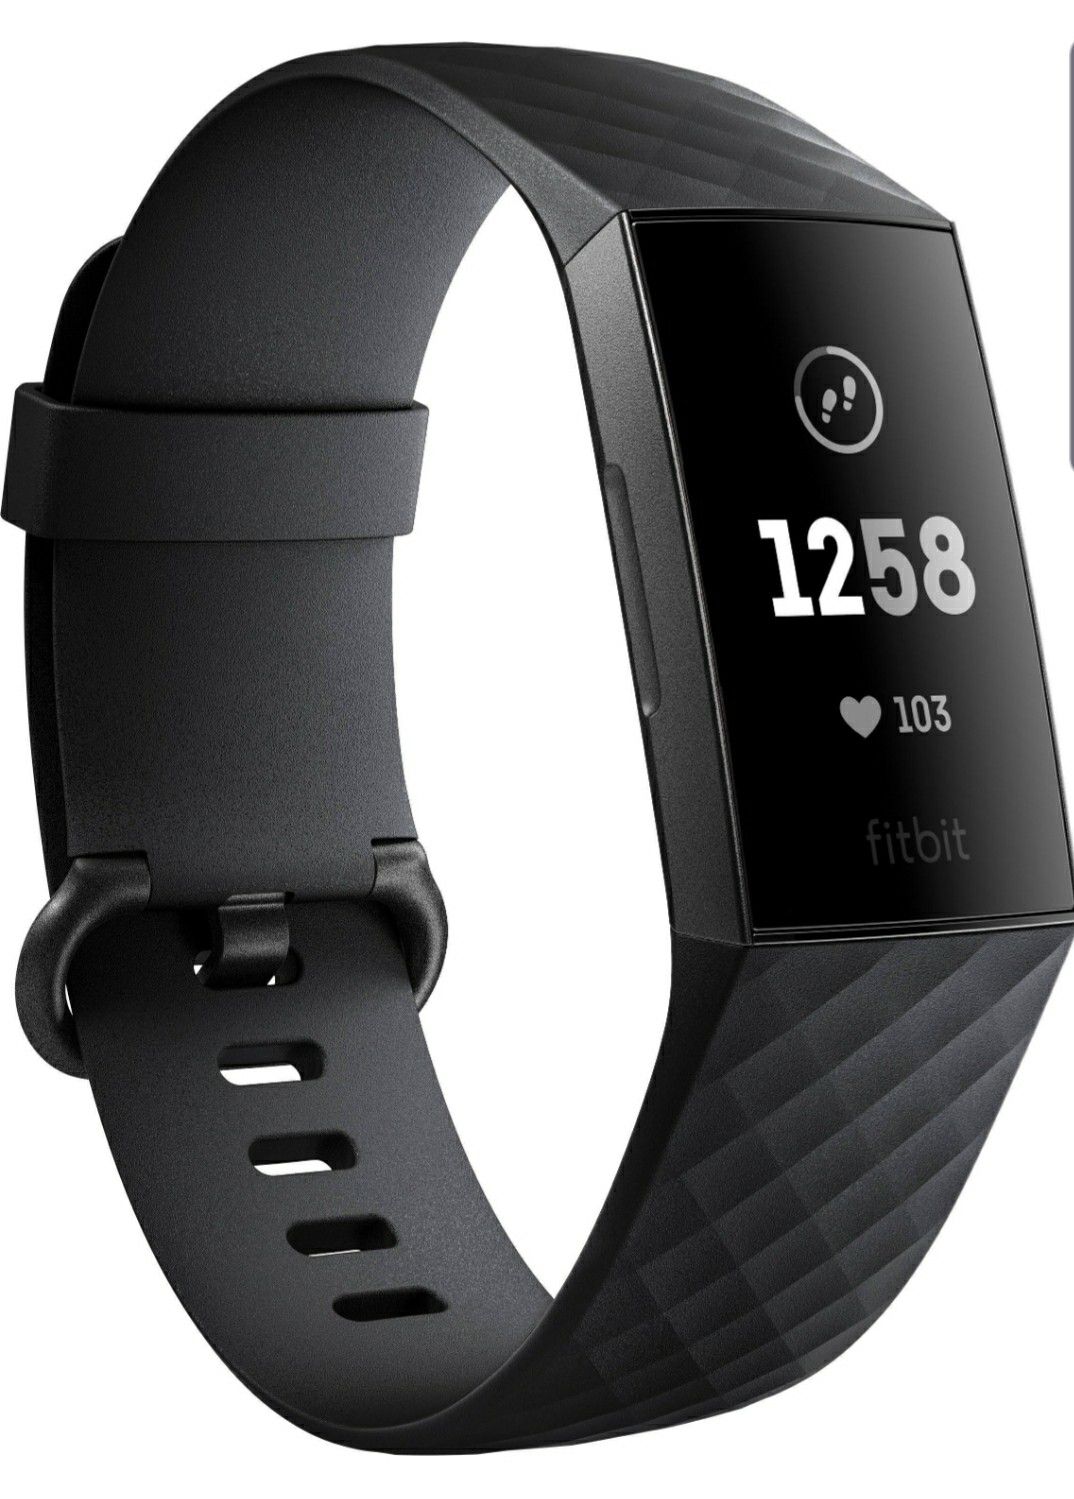 Fitbit - Charge 3 - Brand New - $75